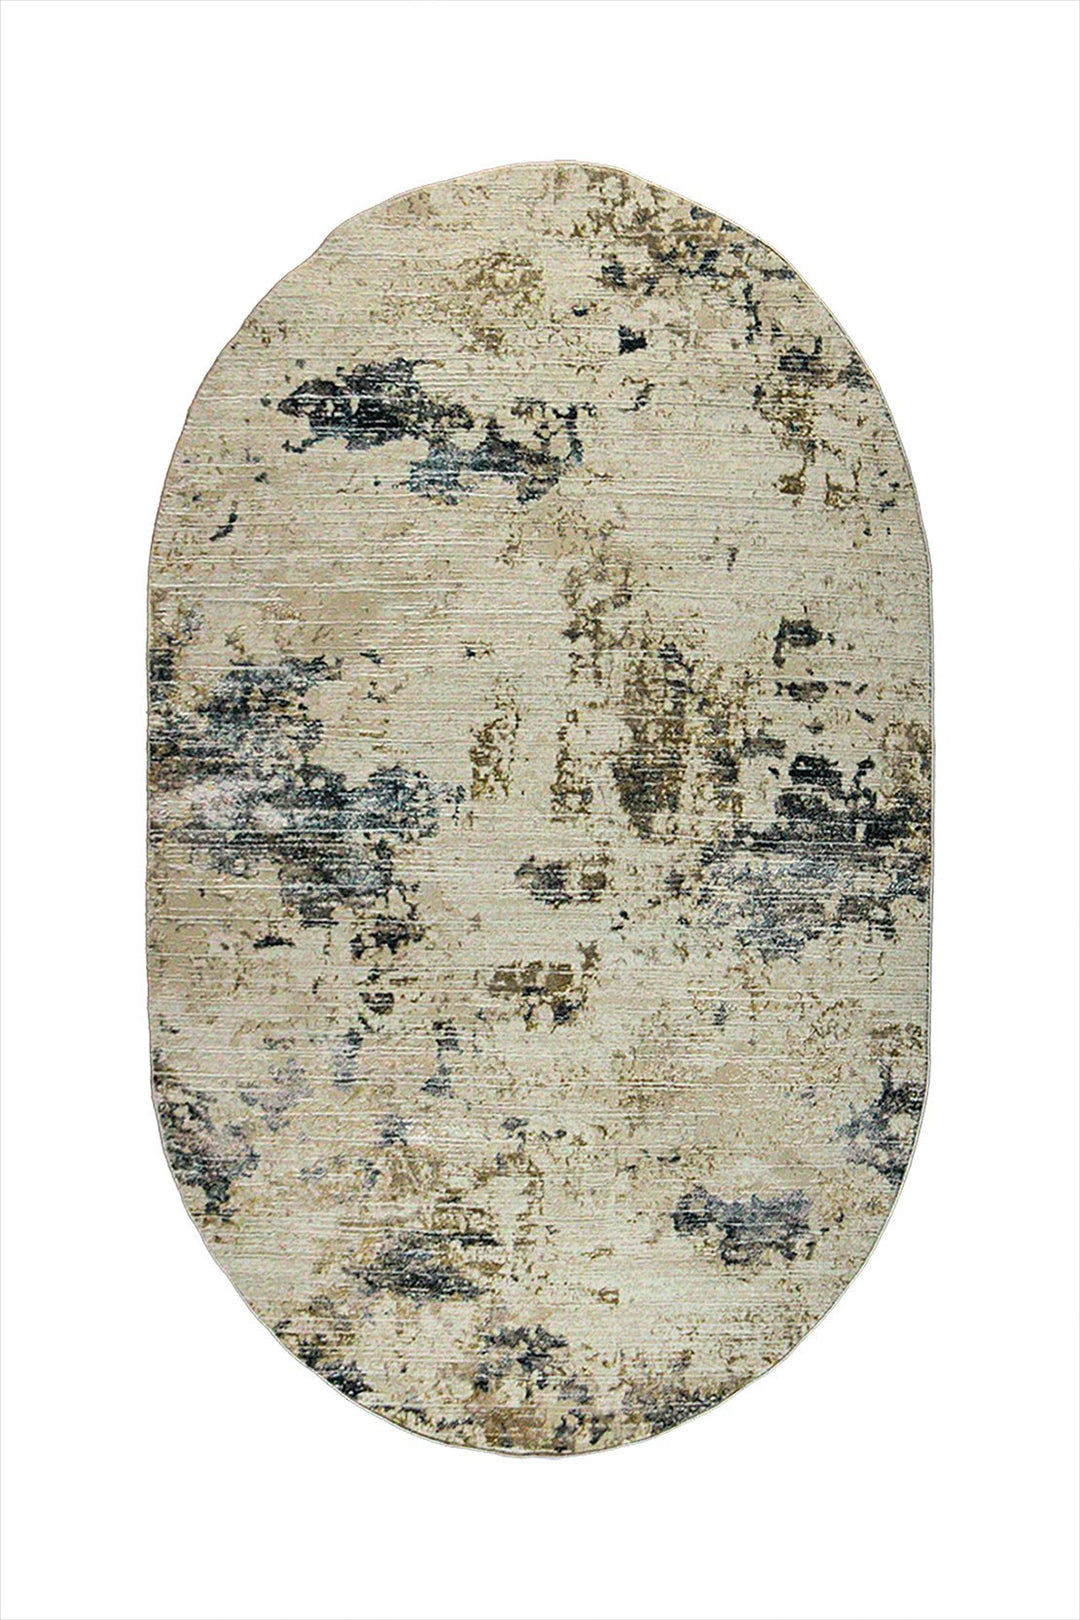 Turkish Modern Festival 1 Rug - Beige - 5.2 x 7.5 FT - Superior Comfort, Modern Style Accent Rugs - V Surfaces